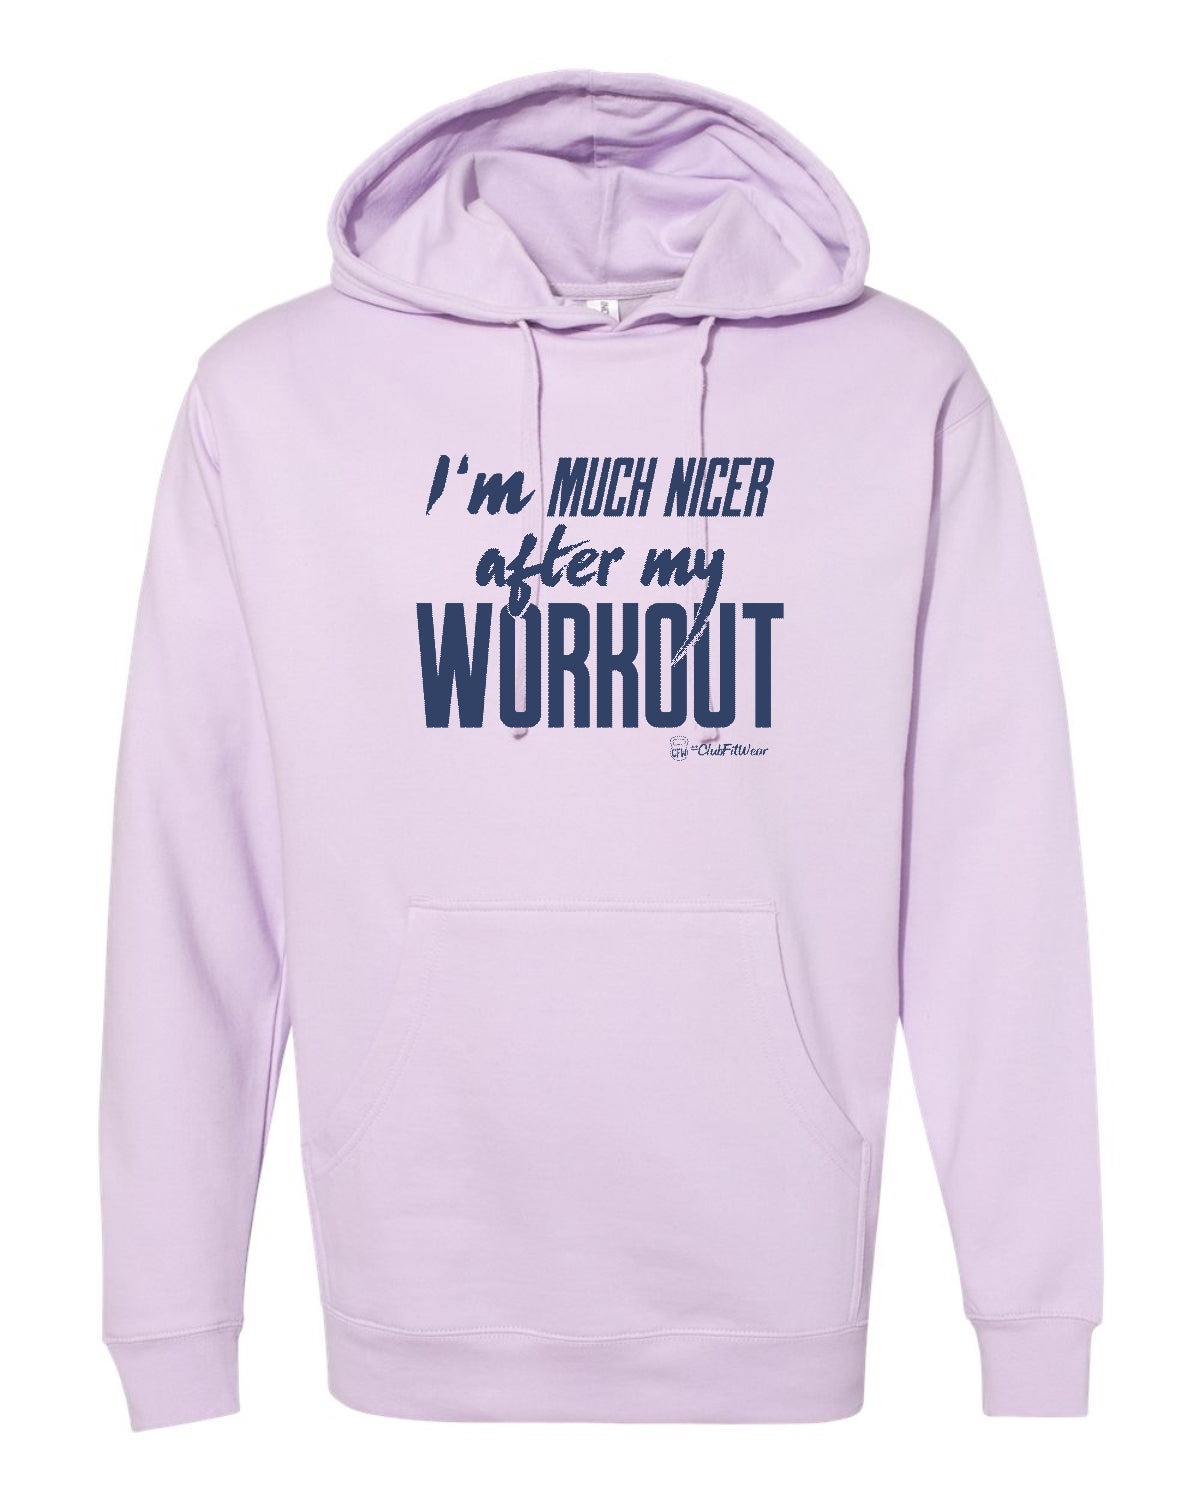 I'm Much Nicer after my Workout - Hoodie